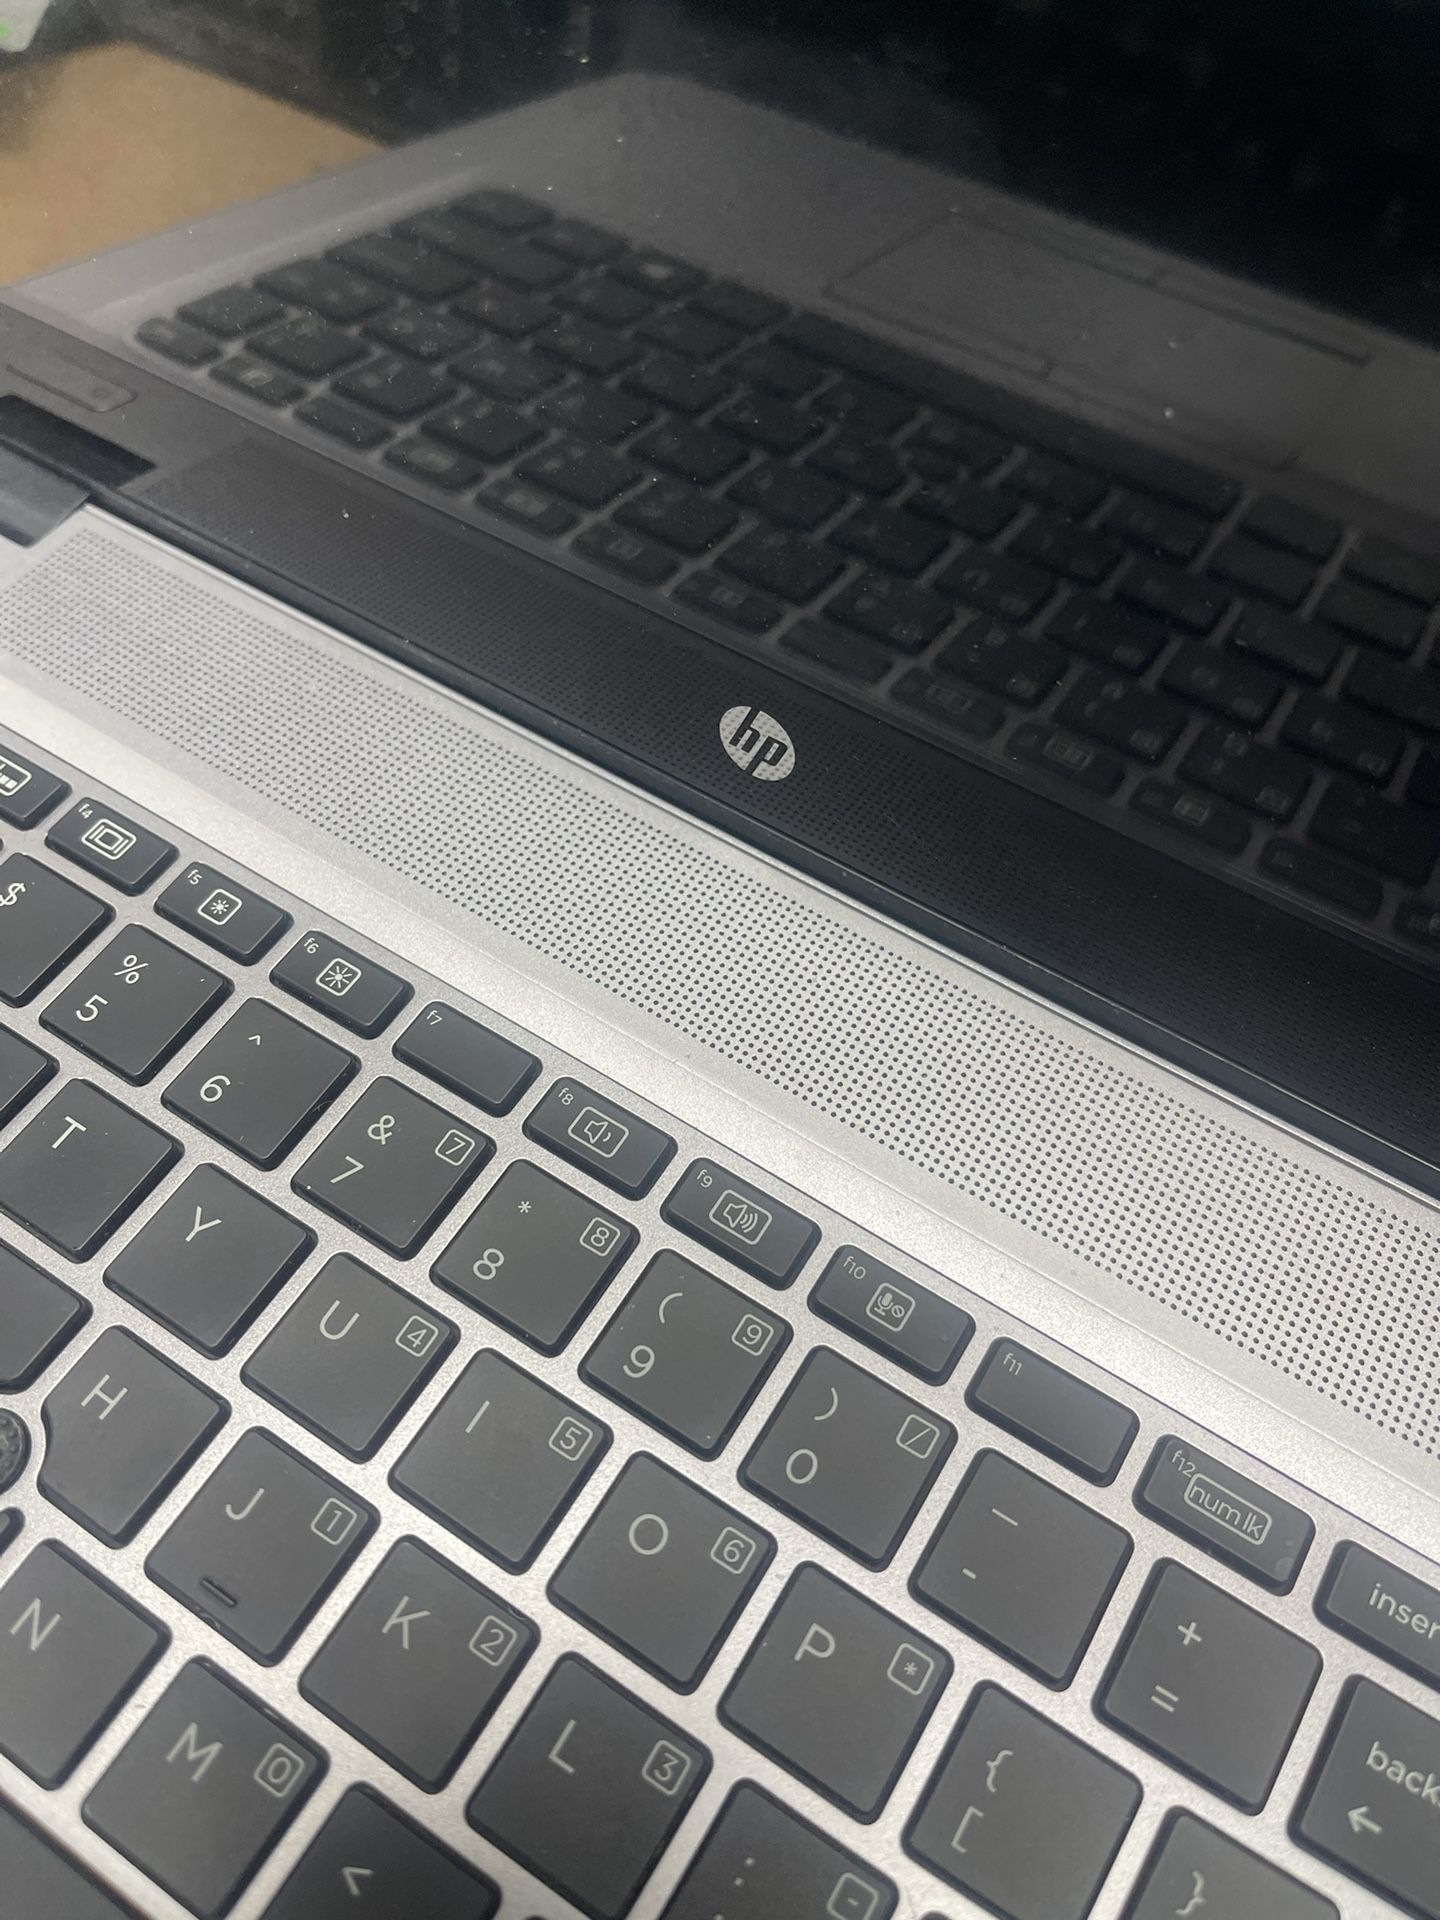 HP Laptop, i5 core, 16GB, with 30 day warranty